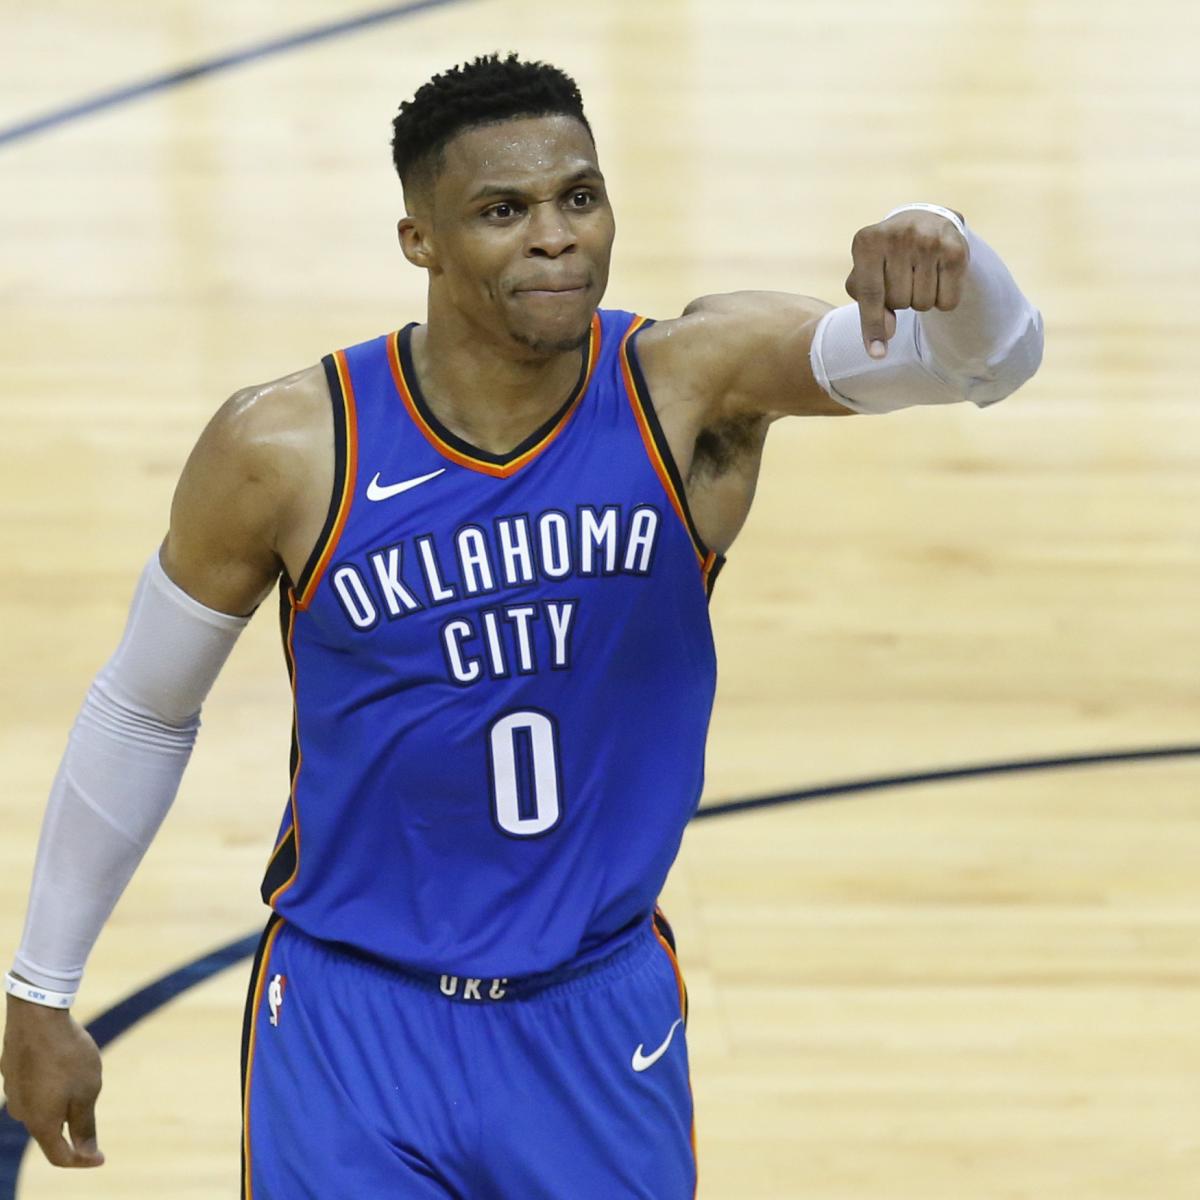 Russell Westbrook's Ex-Teammate: 'It Wasn't Always Fun' to Play with